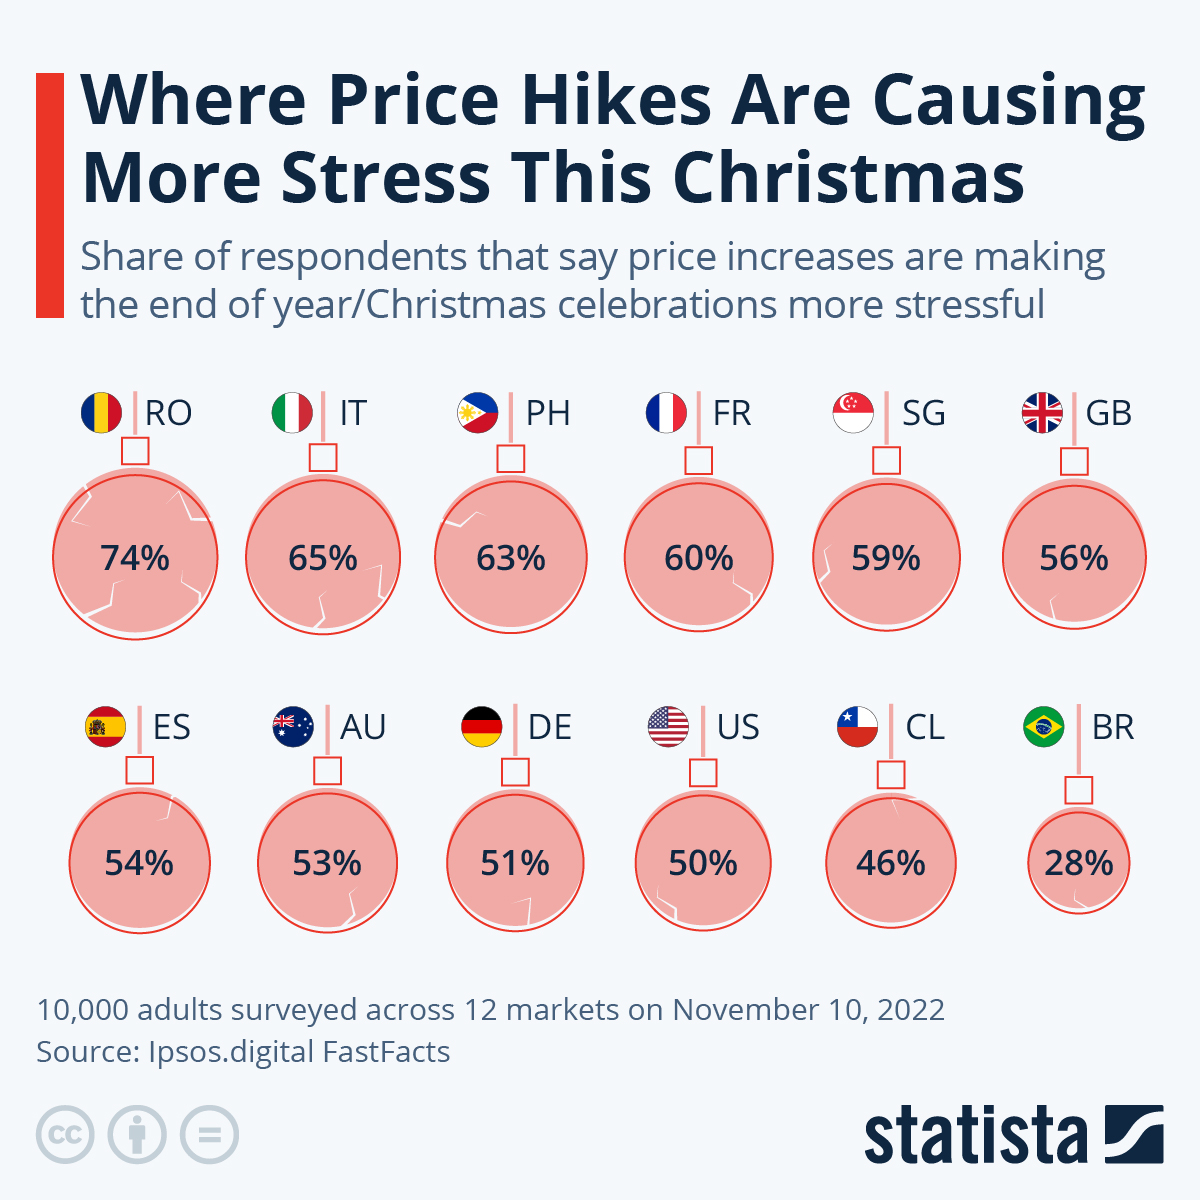 In which Countries Price Hikes Are Causing More Stress This Christmas